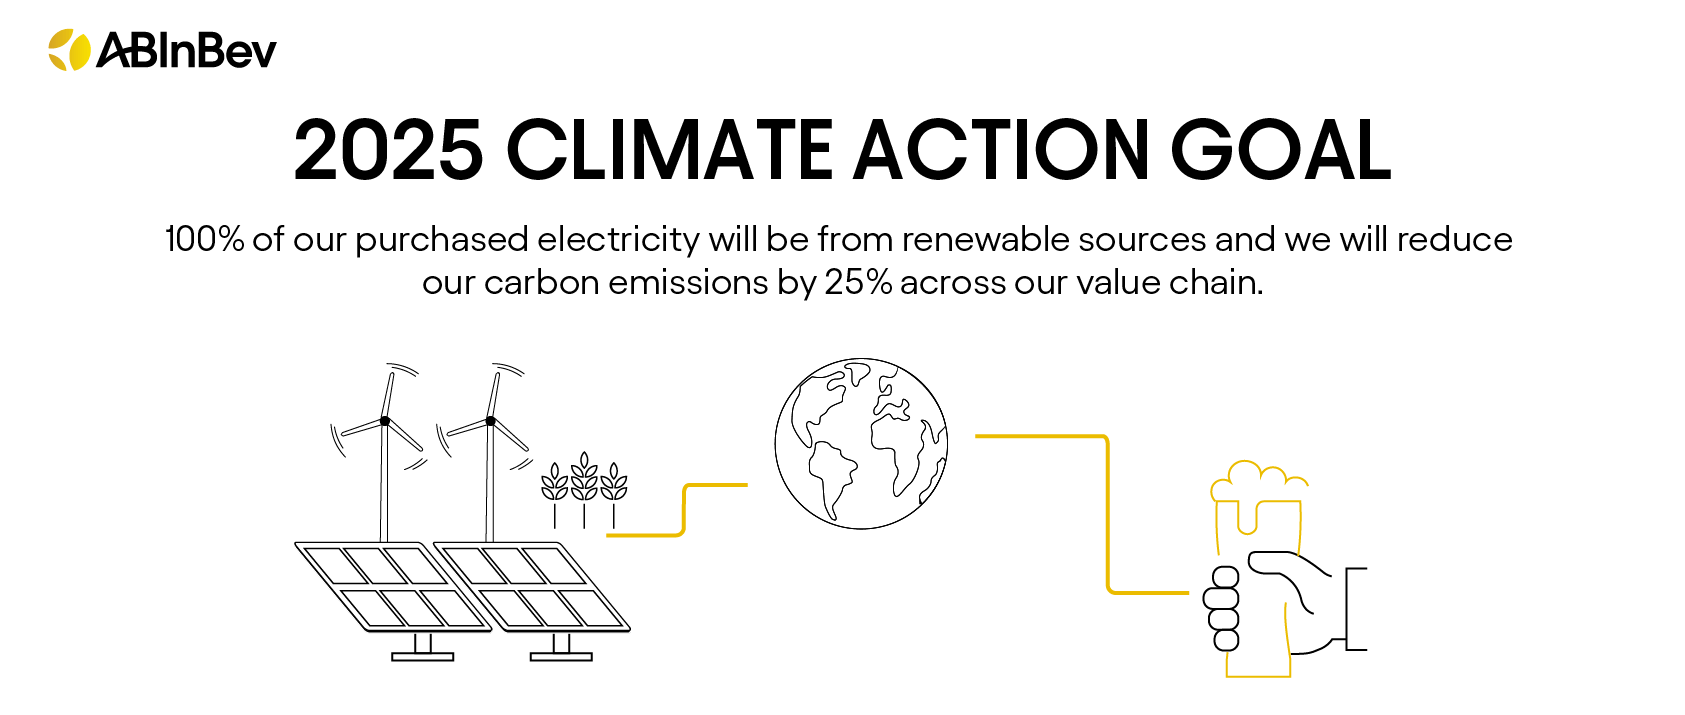 climate action goal image